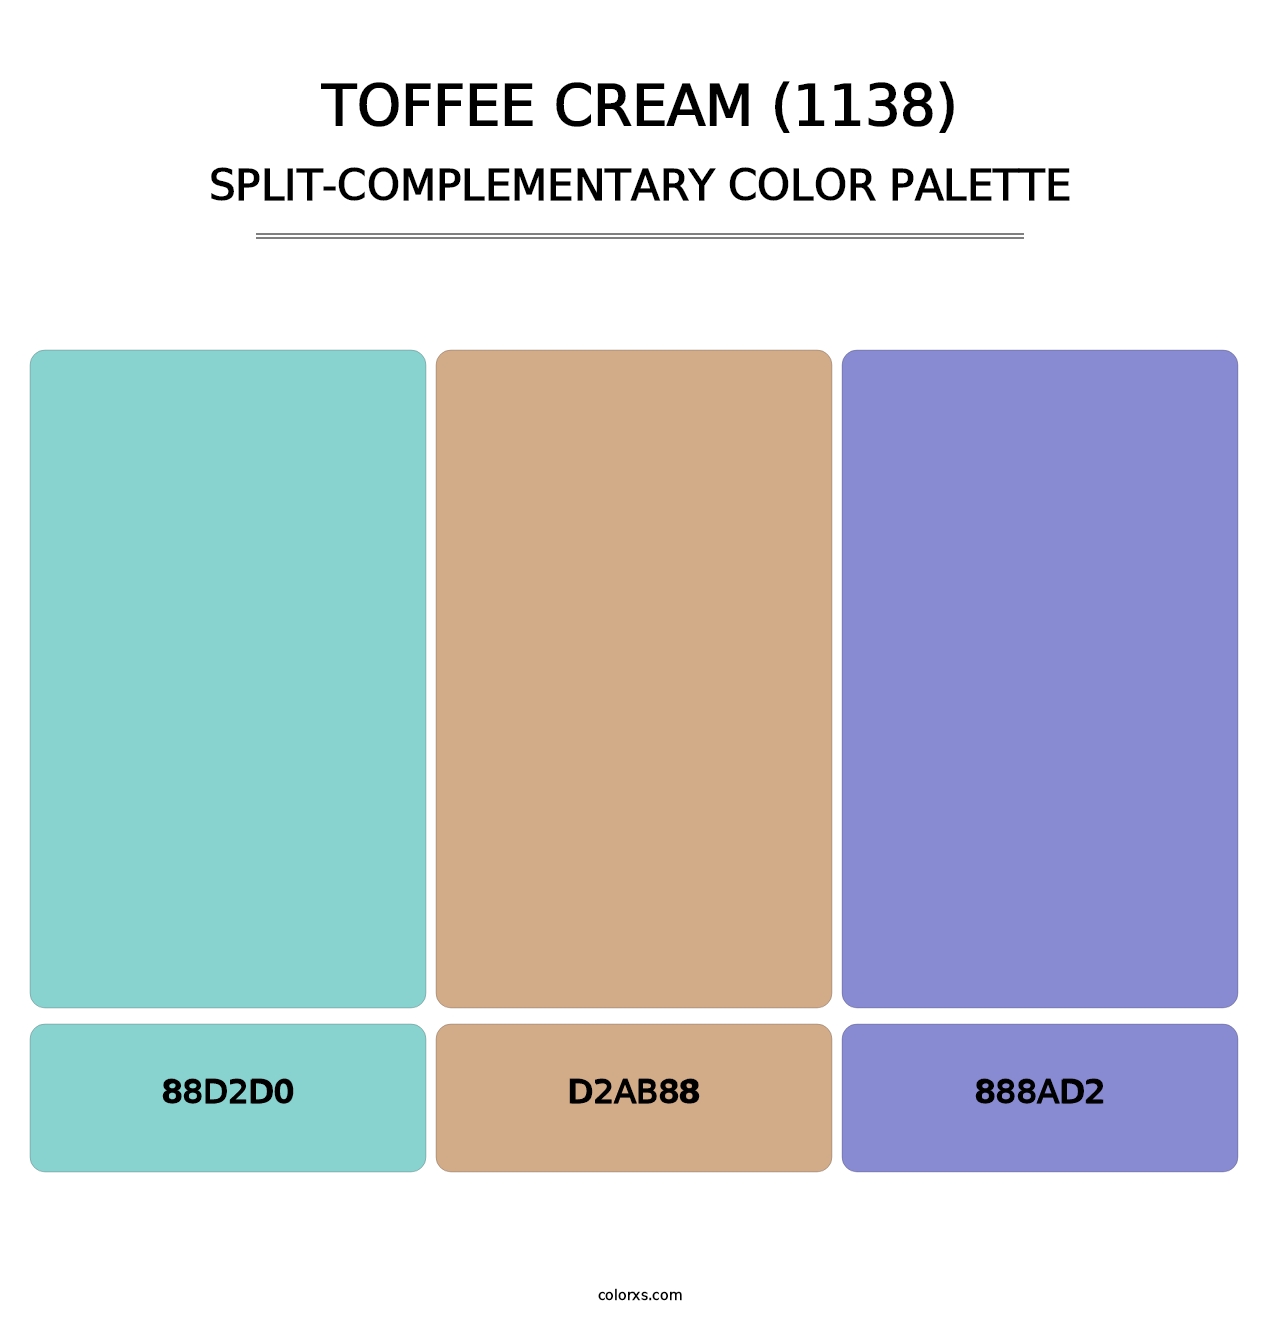 Toffee Cream (1138) - Split-Complementary Color Palette